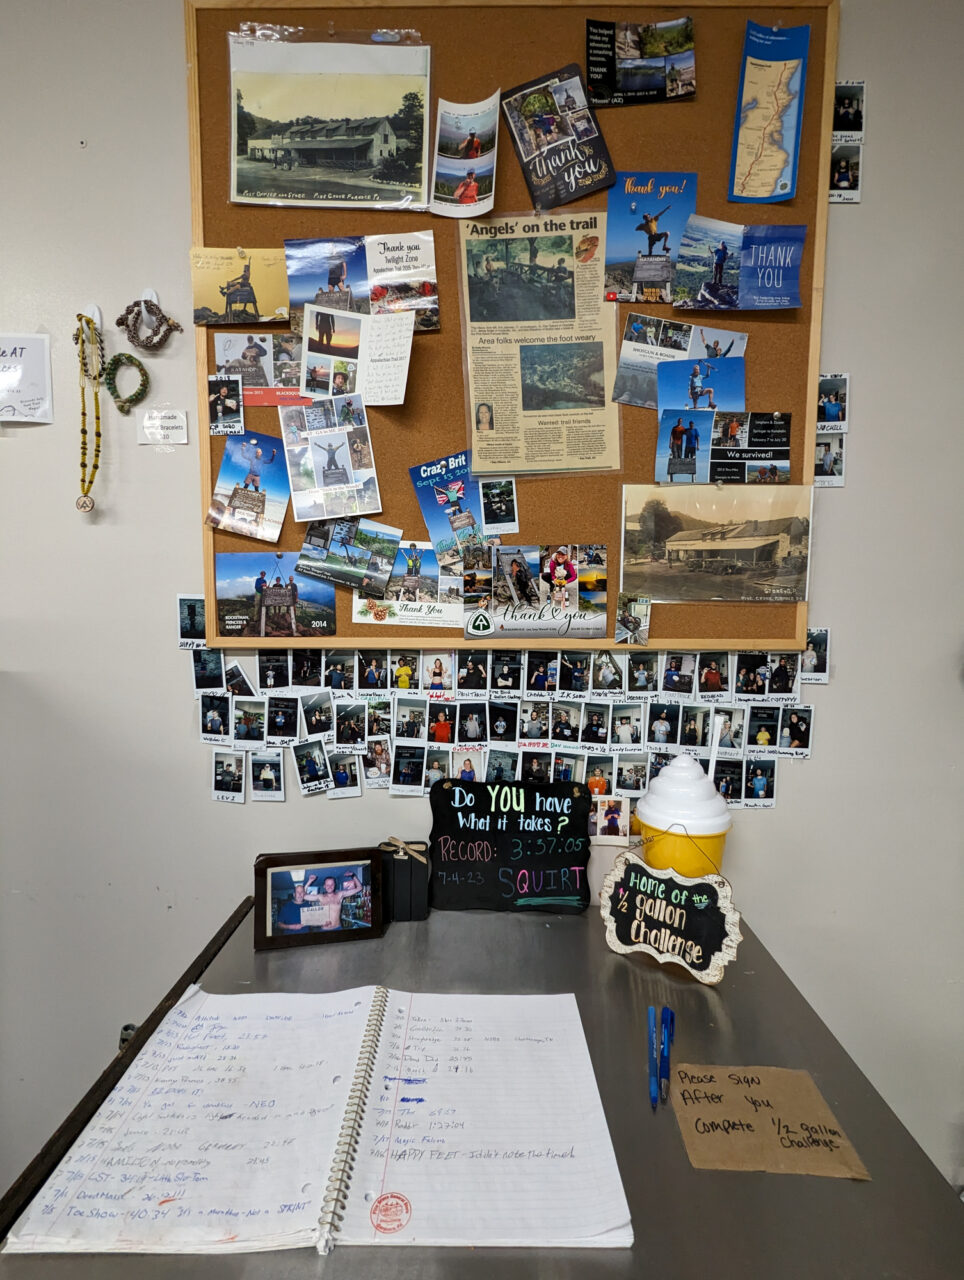 Photos of Appalachian Trail hikers who completed the half-gallon challenge are displayed at the Pine Grove Furnace store on Tuesday, July 18, 2023.